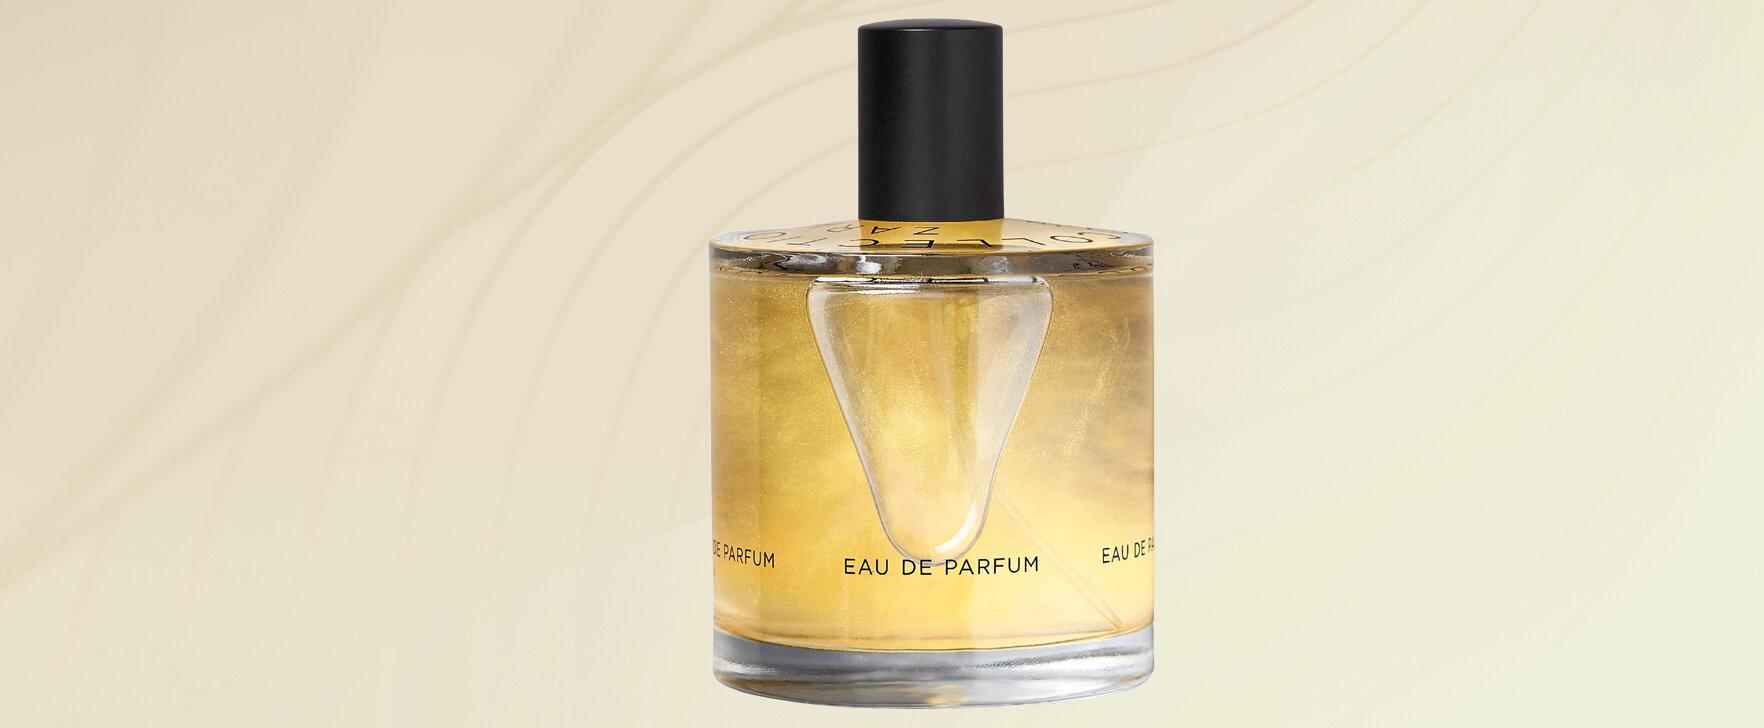 A Tribute to the Treasures of Nature: The New Eau de Parfum Cloud Collection (No.4) by Zarkoperfume